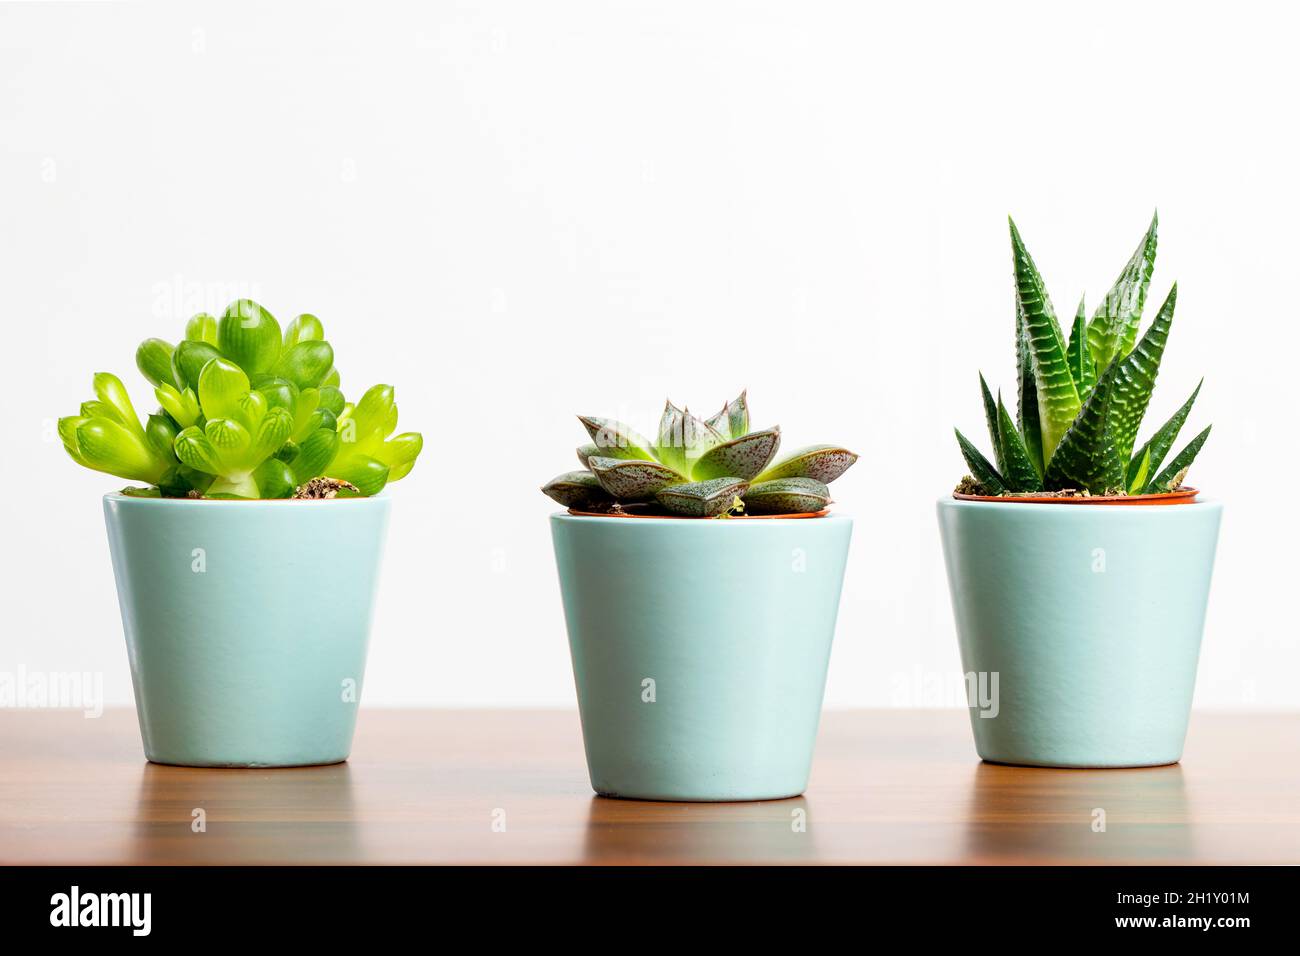 Close up photo of colourful succulents standing on wooden table.House decoration concept. Stock Photo